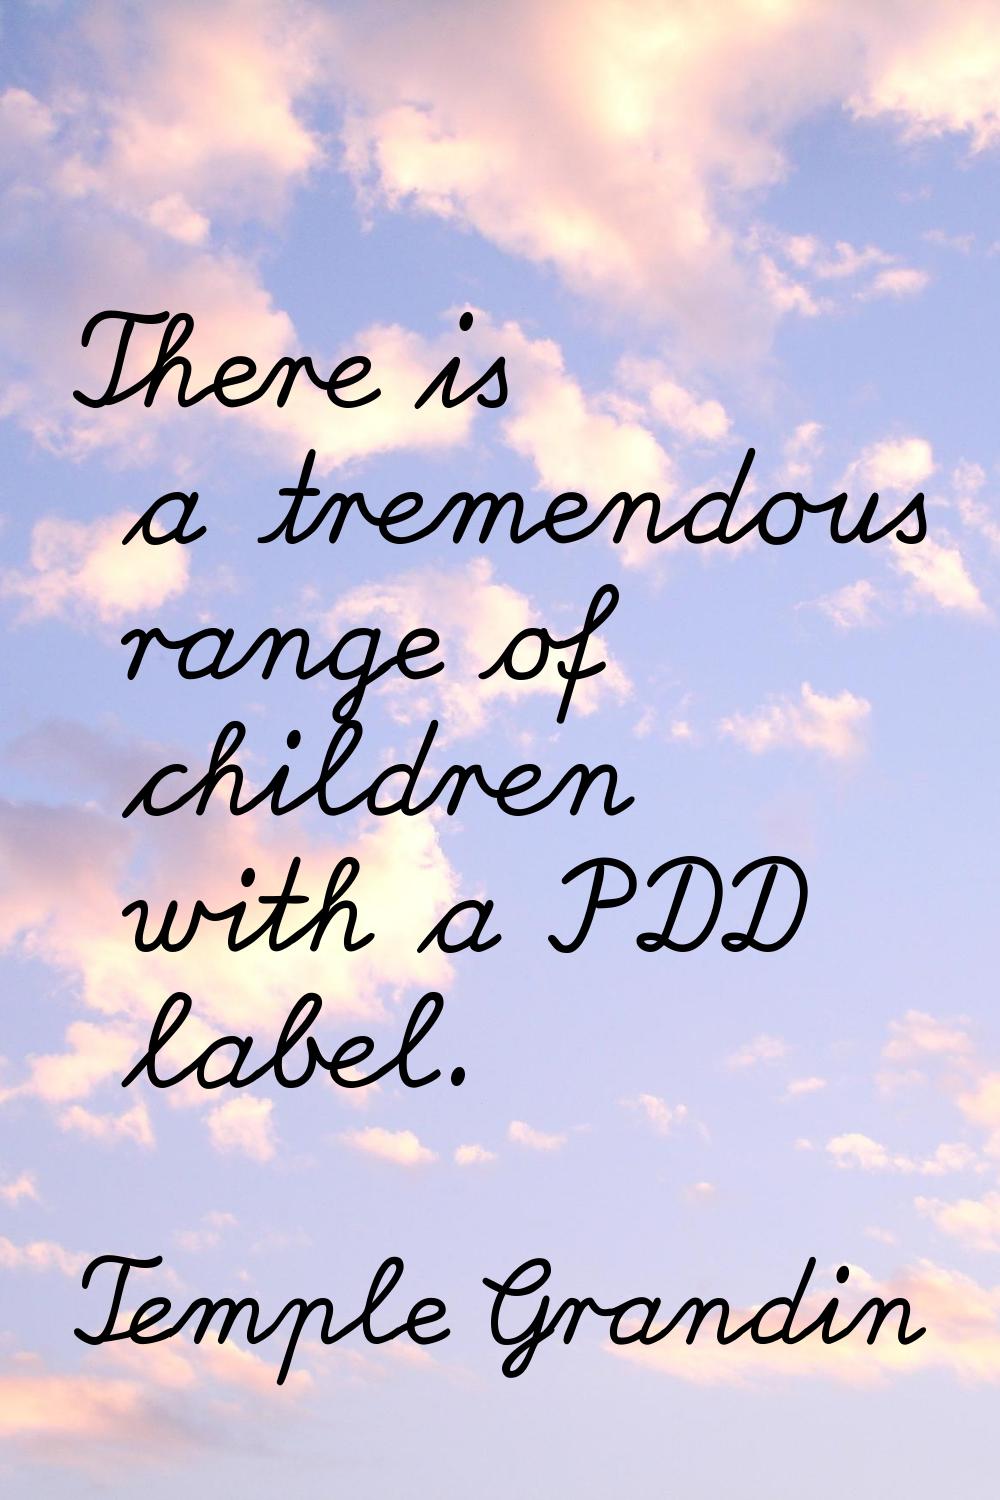 There is a tremendous range of children with a PDD label.